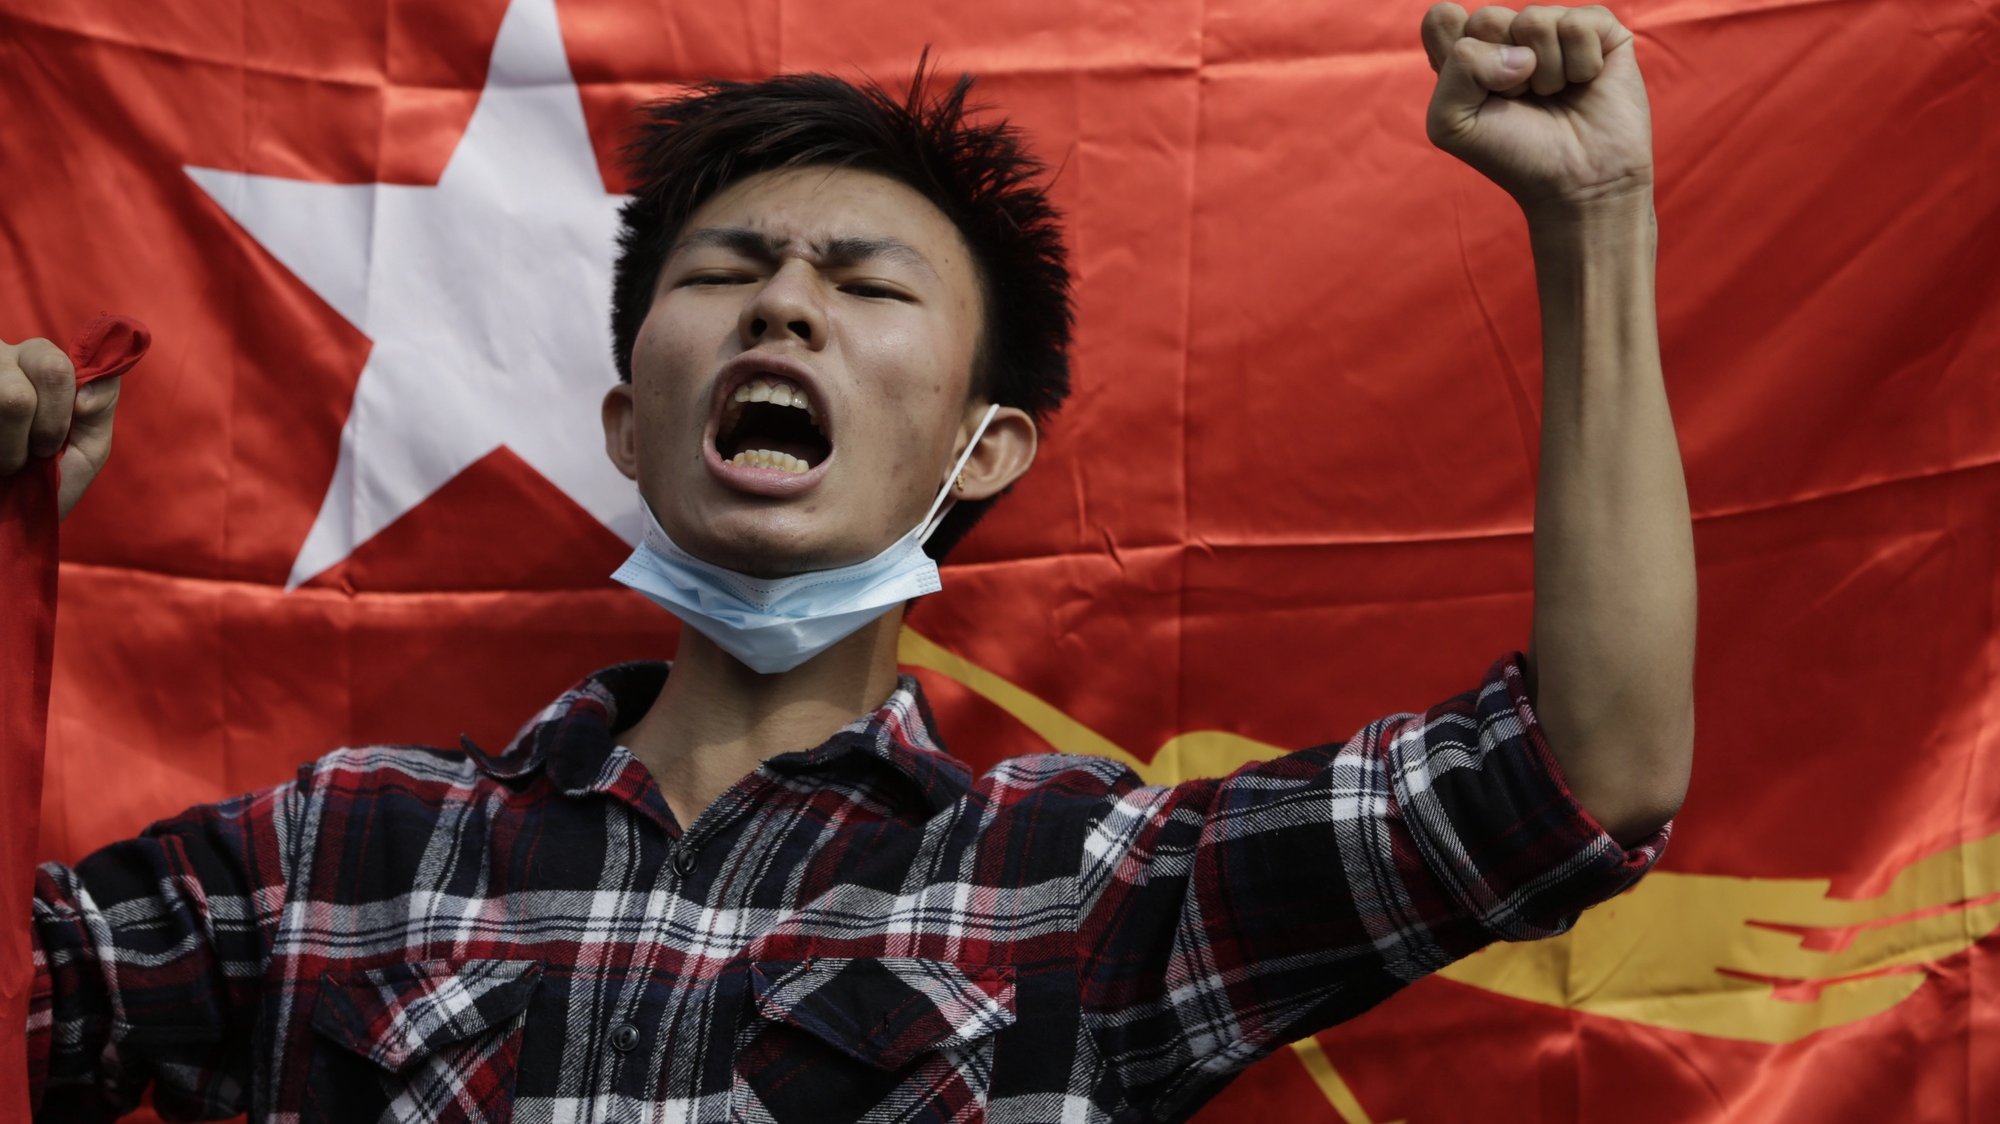 epa09711507 (31/31) (FILE) - A protester shouts slogans in front of a National League for Democracy (NLD) flag during a protest against the military, in Yangon, Myanmar, 06 February 2021 (reissued 27 January 2022). On 01 February 2021 the Myanmar Army arrested democratically elected political leaders and seized control of the country. Protests erupted nationwide leading to violent clashes and a military retaliation that had left at least 1,000 dead within the first six months. According to the United Nations, by early December 2021 over 280,000 people were still internally displaced in Myanmar due to armed clashes and insecurity.  EPA/STRINGER  ATTENTION: This Image is part of a PHOTO SET